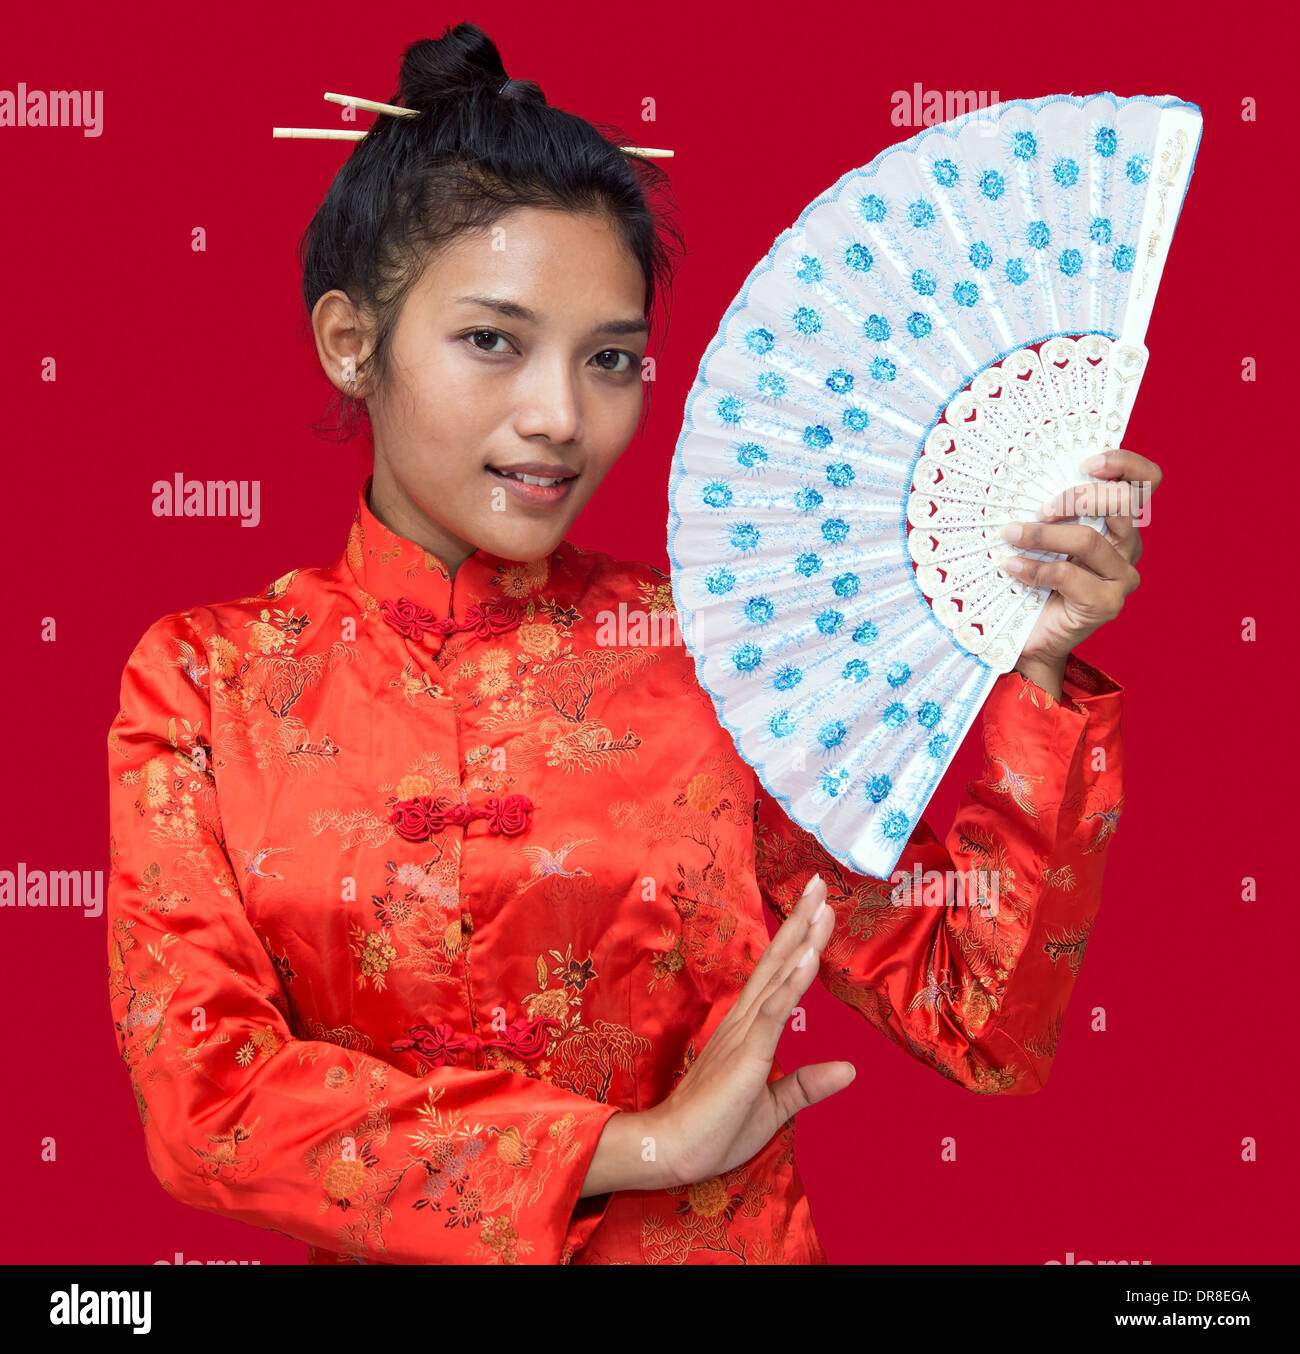 Asian girl with a fan Stock Photo - Alamy